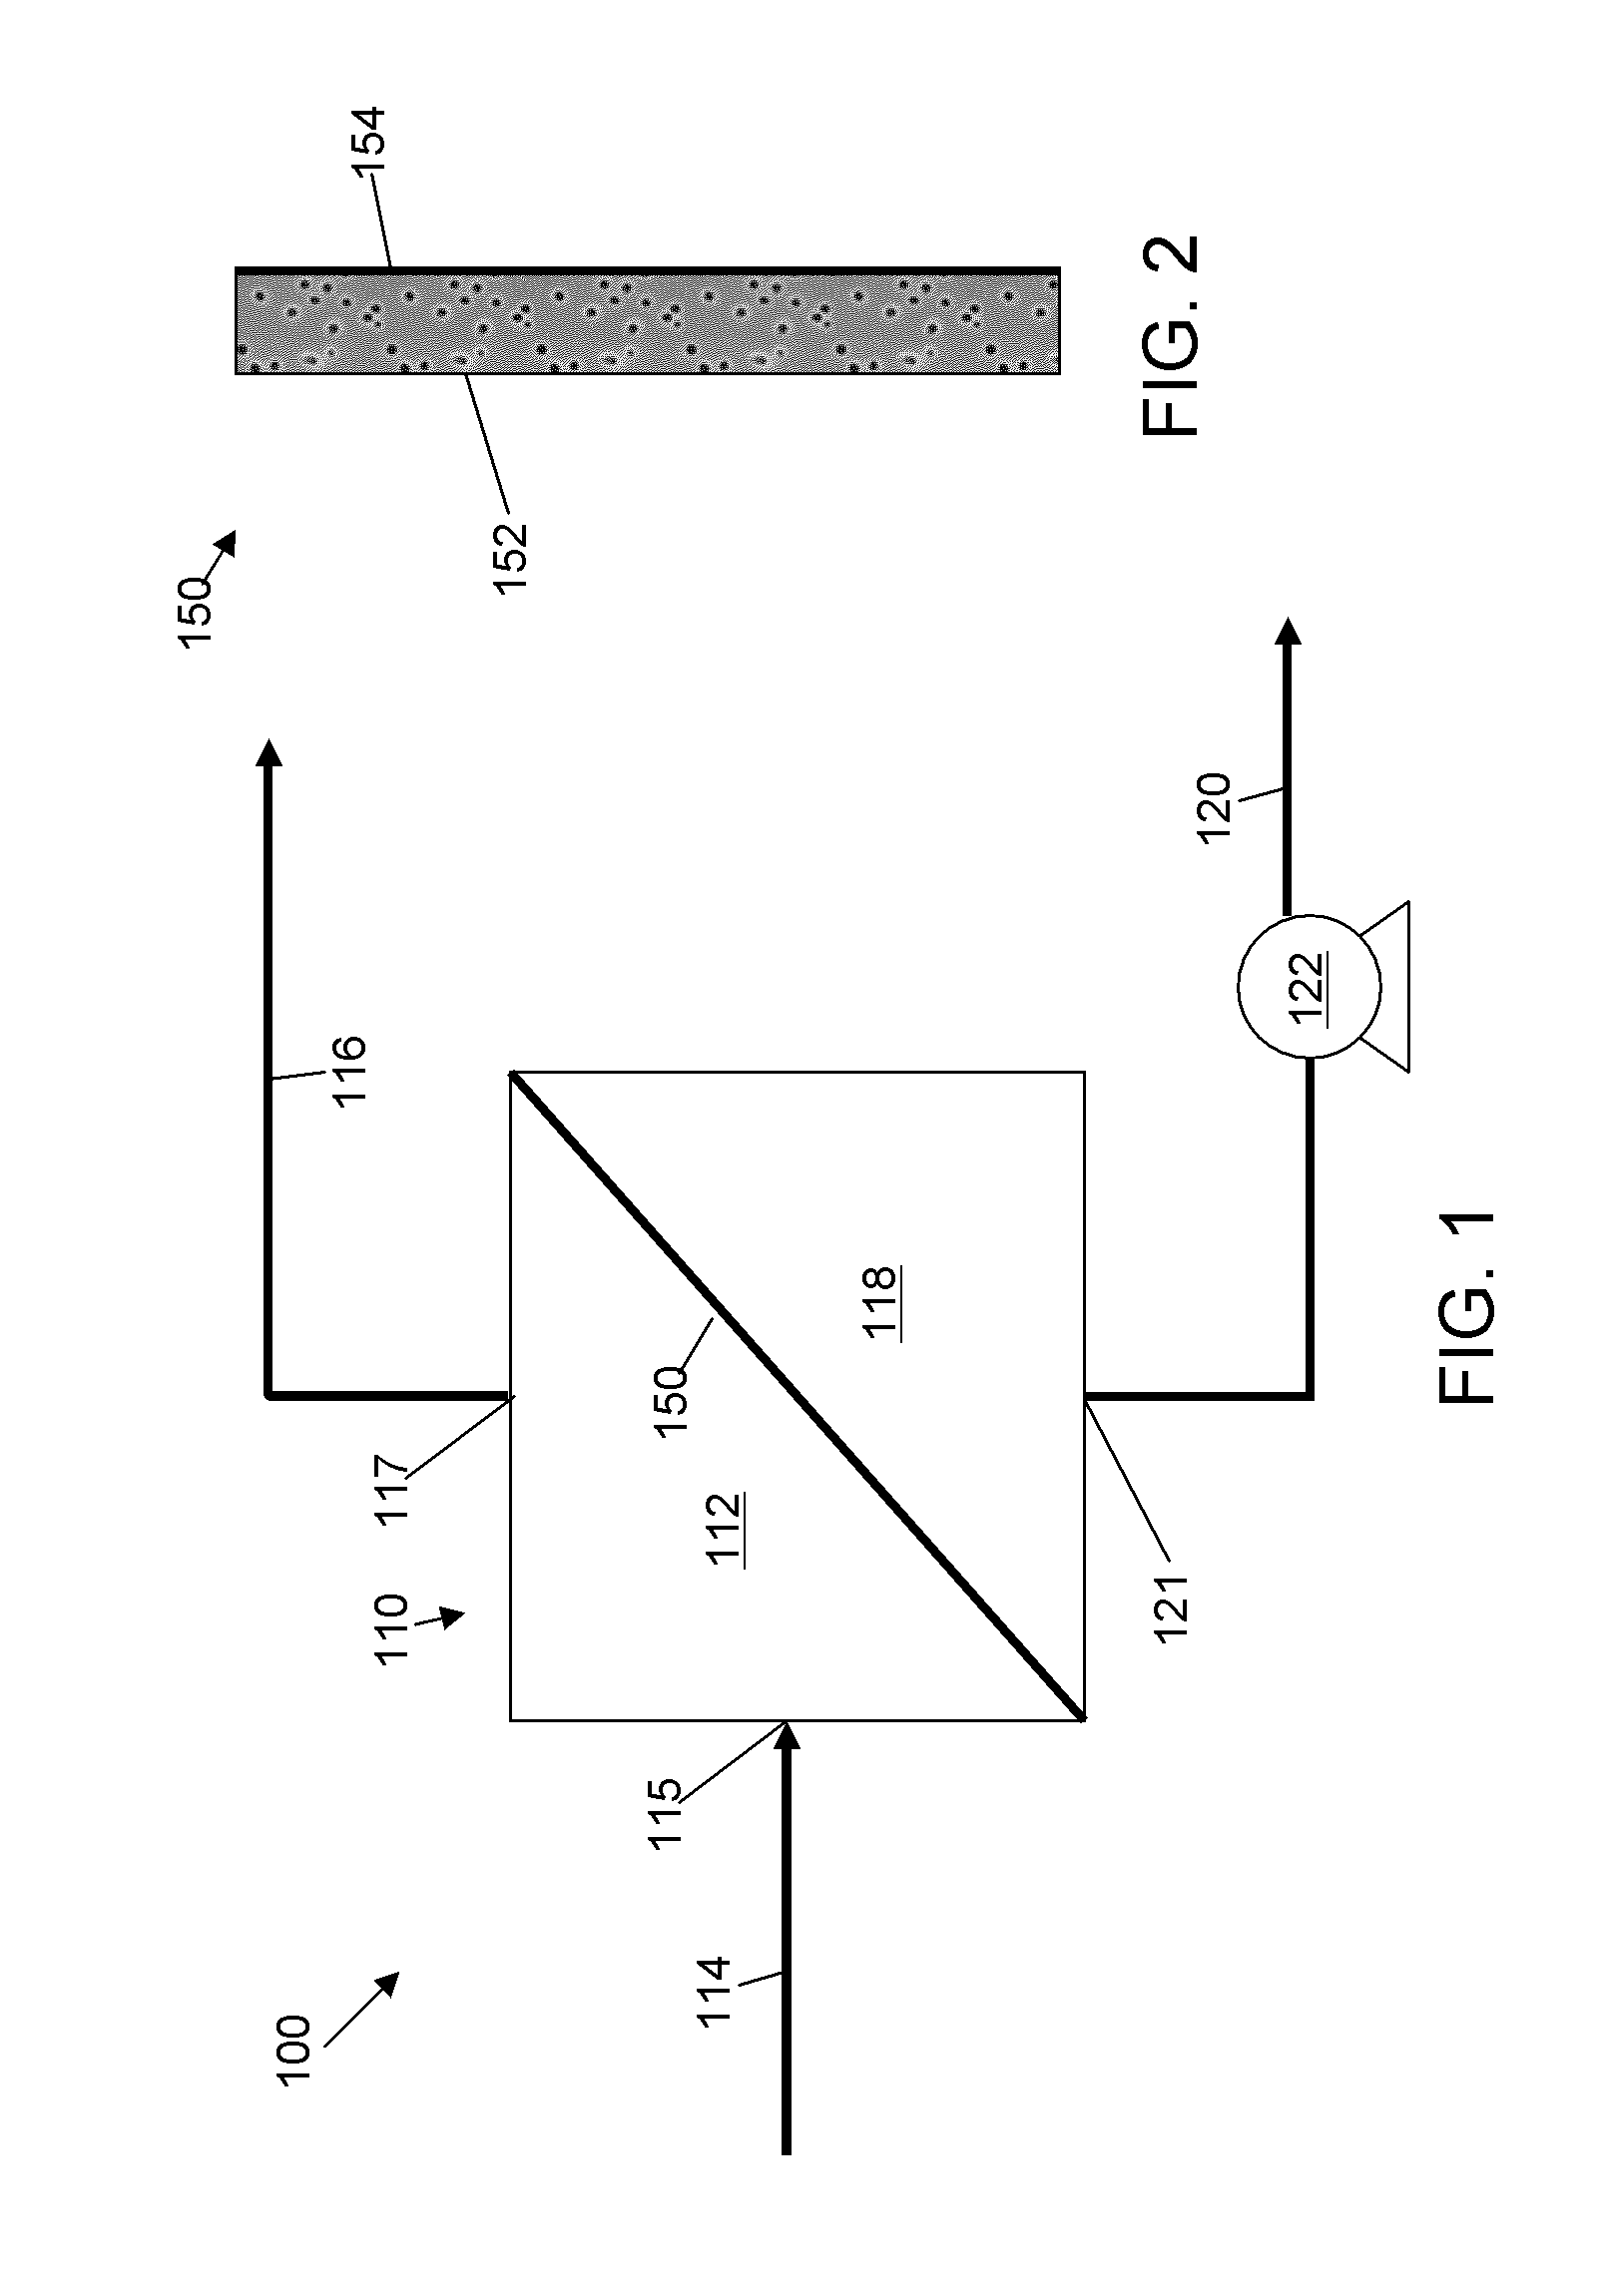 Supported ionic liquid membrane system and process for aromatic separation from hydrocarbon feeds